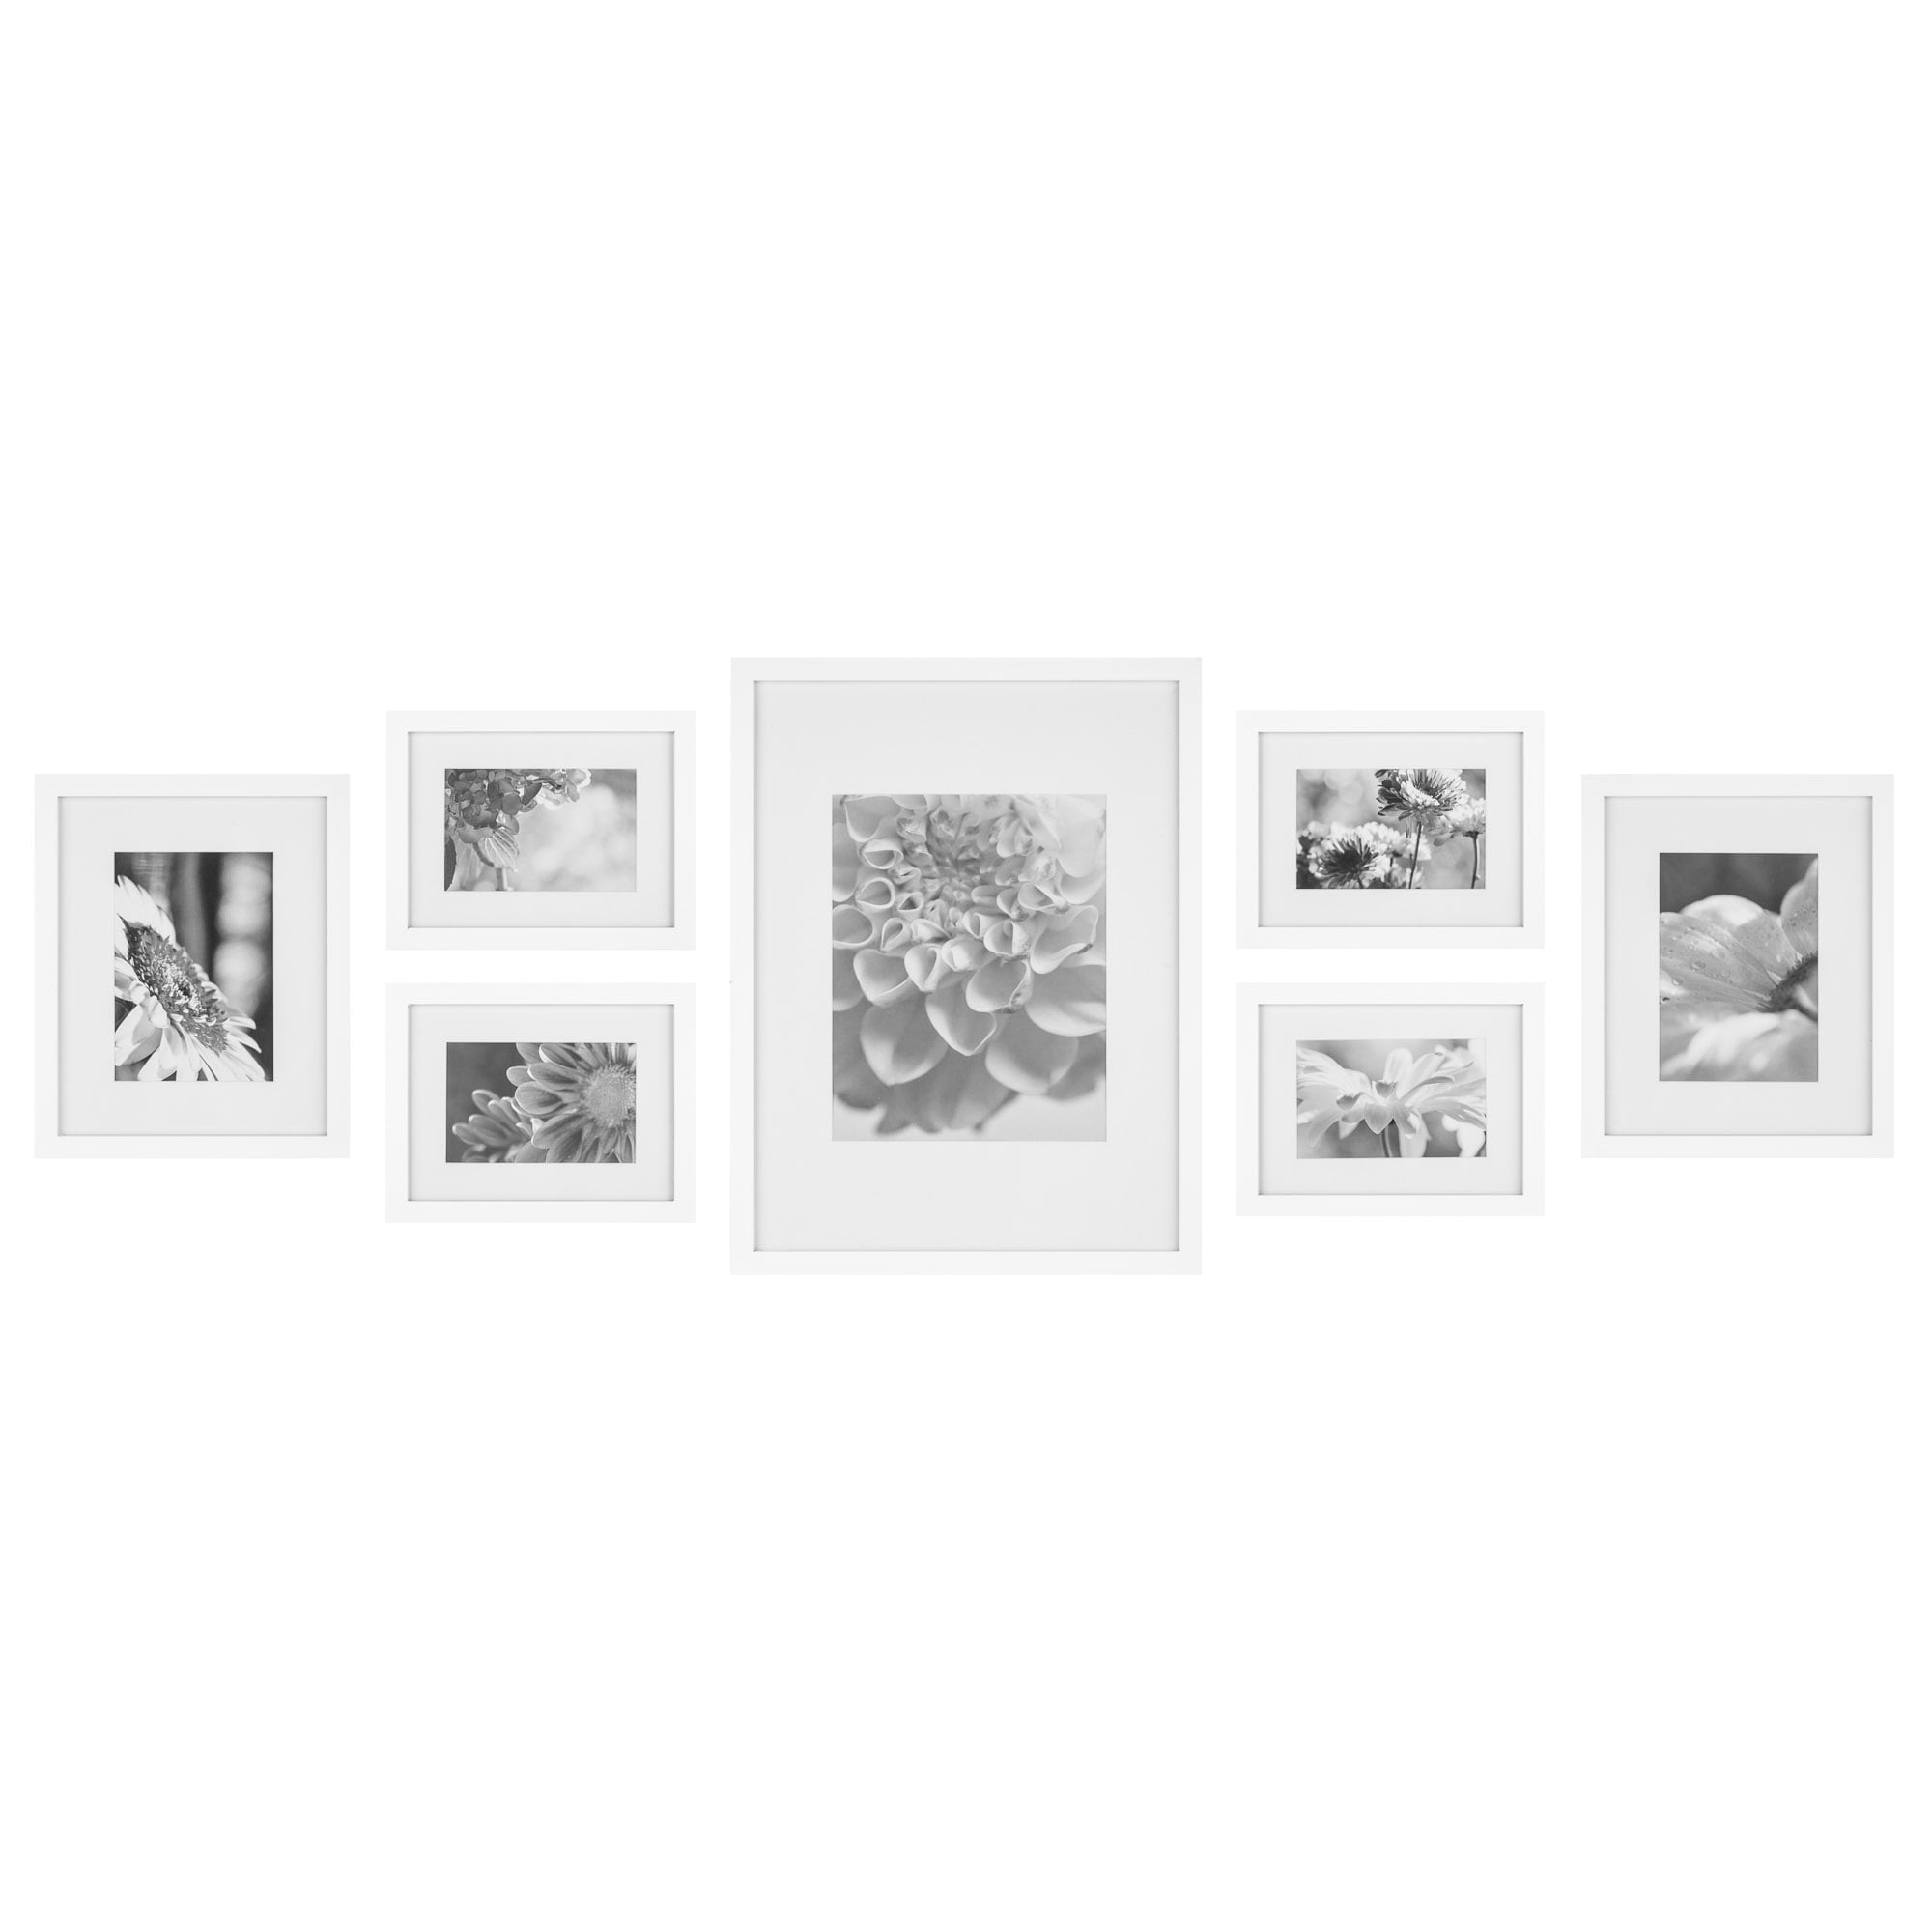  Gallery Perfect 7 Piece White Gallery Wall Kit Picture